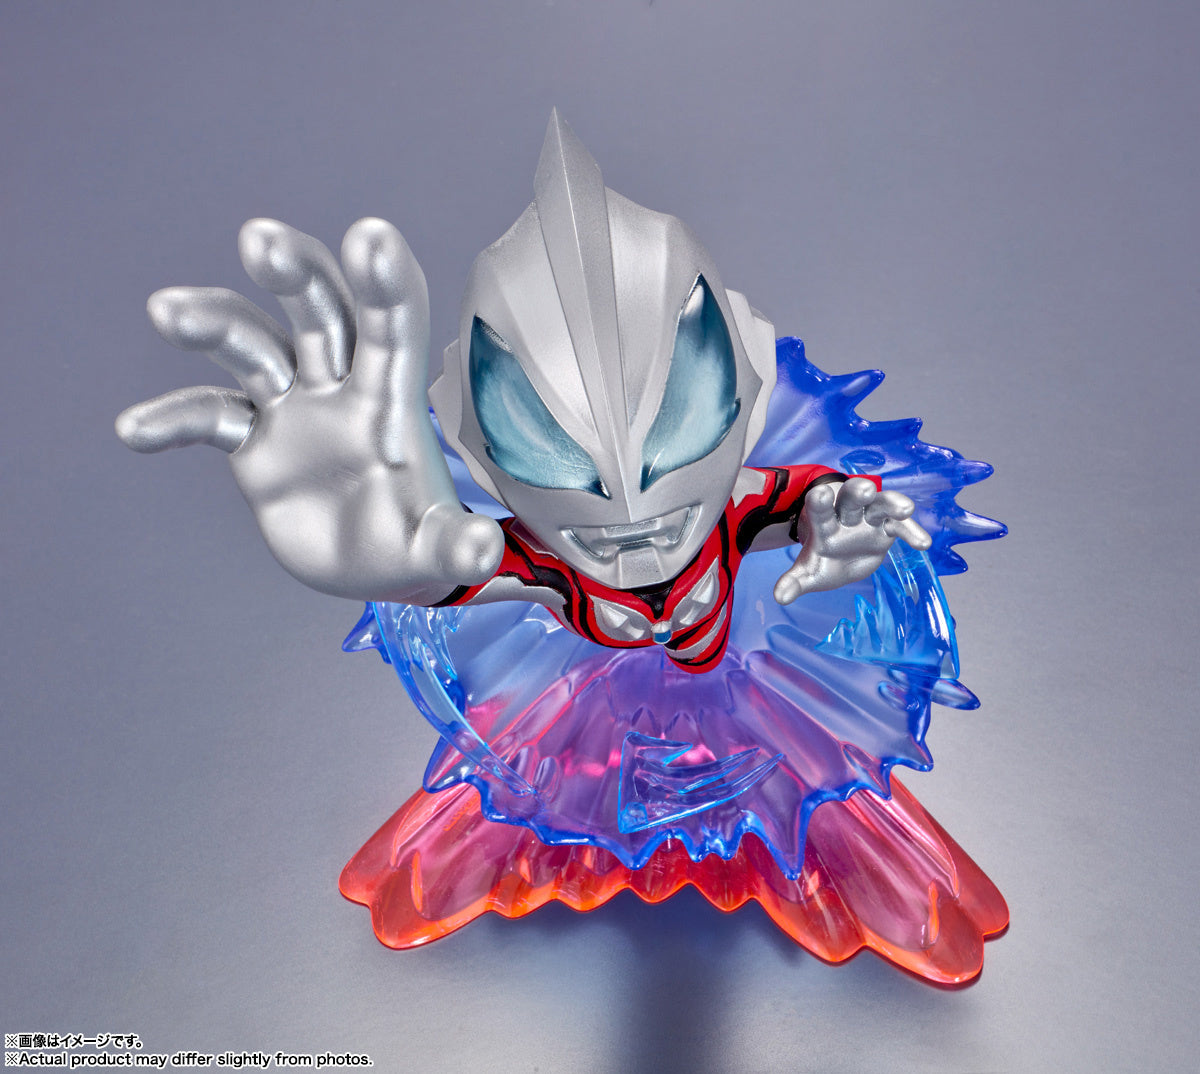 Bandai - Tamashii Nations Box - Ultraman ARTlized: March To The End Of The Big Milkyway (Box of 8)